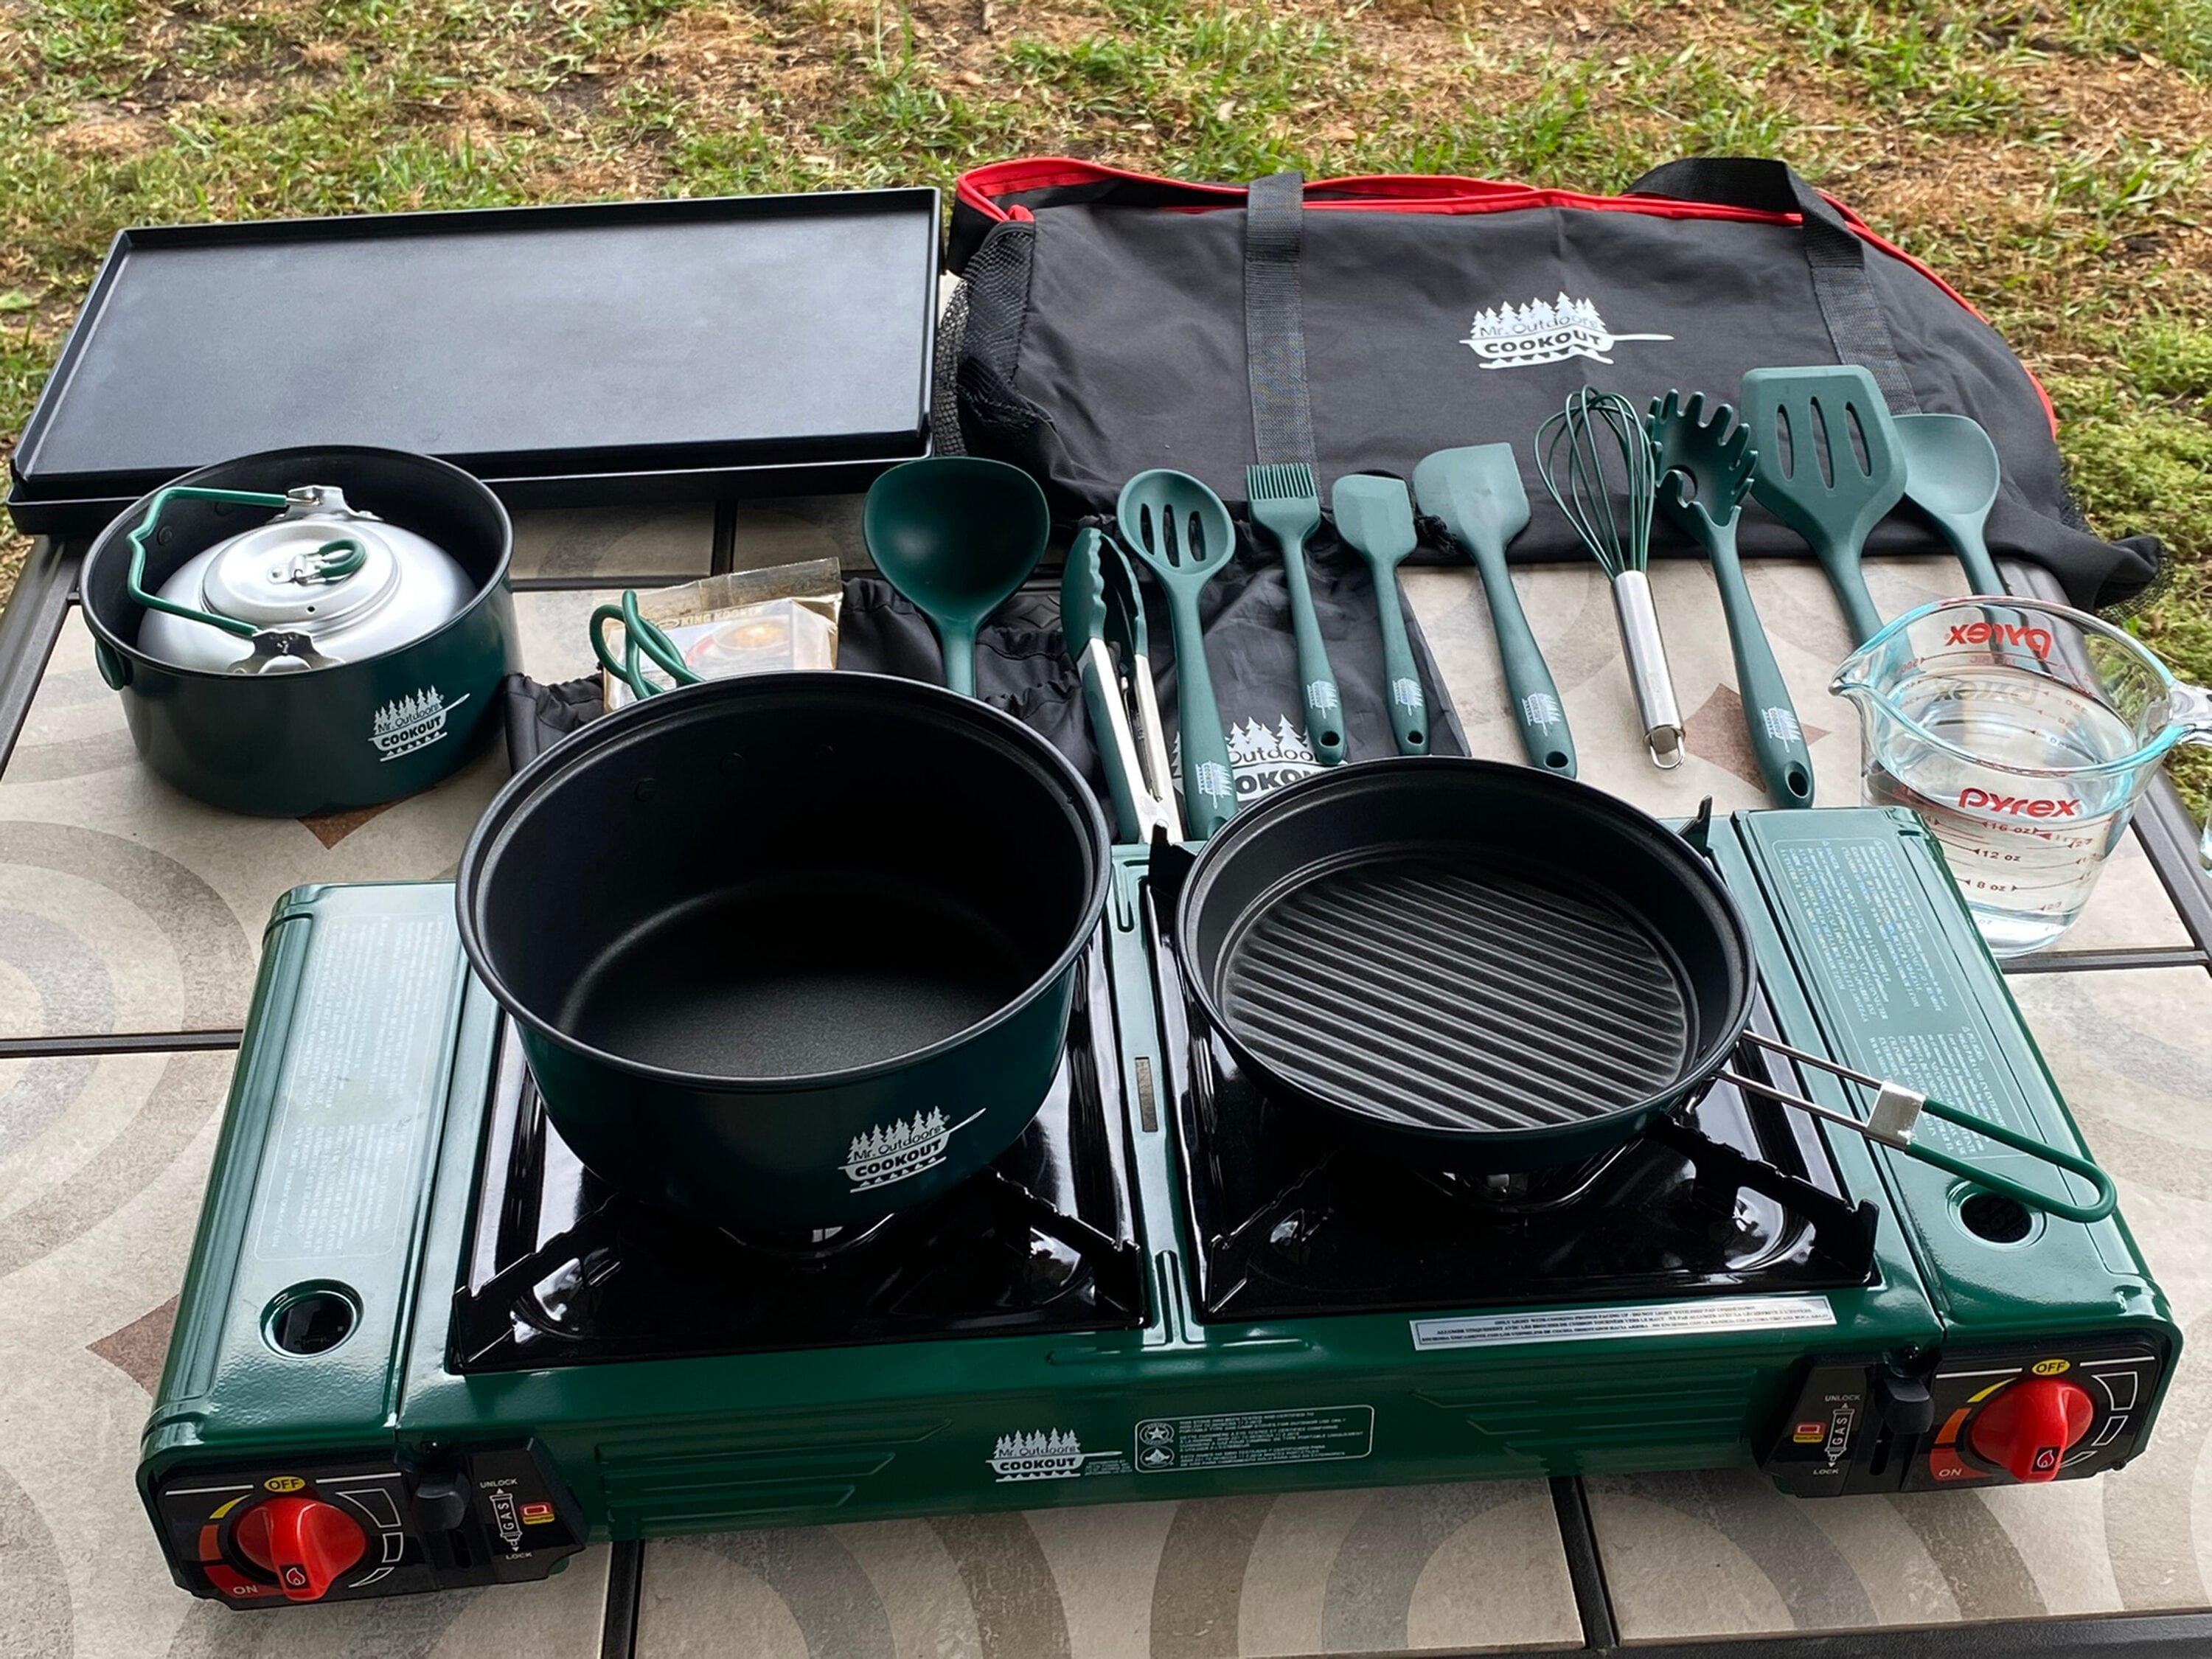 Mr. Outdoors Cookout 10 Pc. Green Silicone Coated Utensil Set with Carry Bag